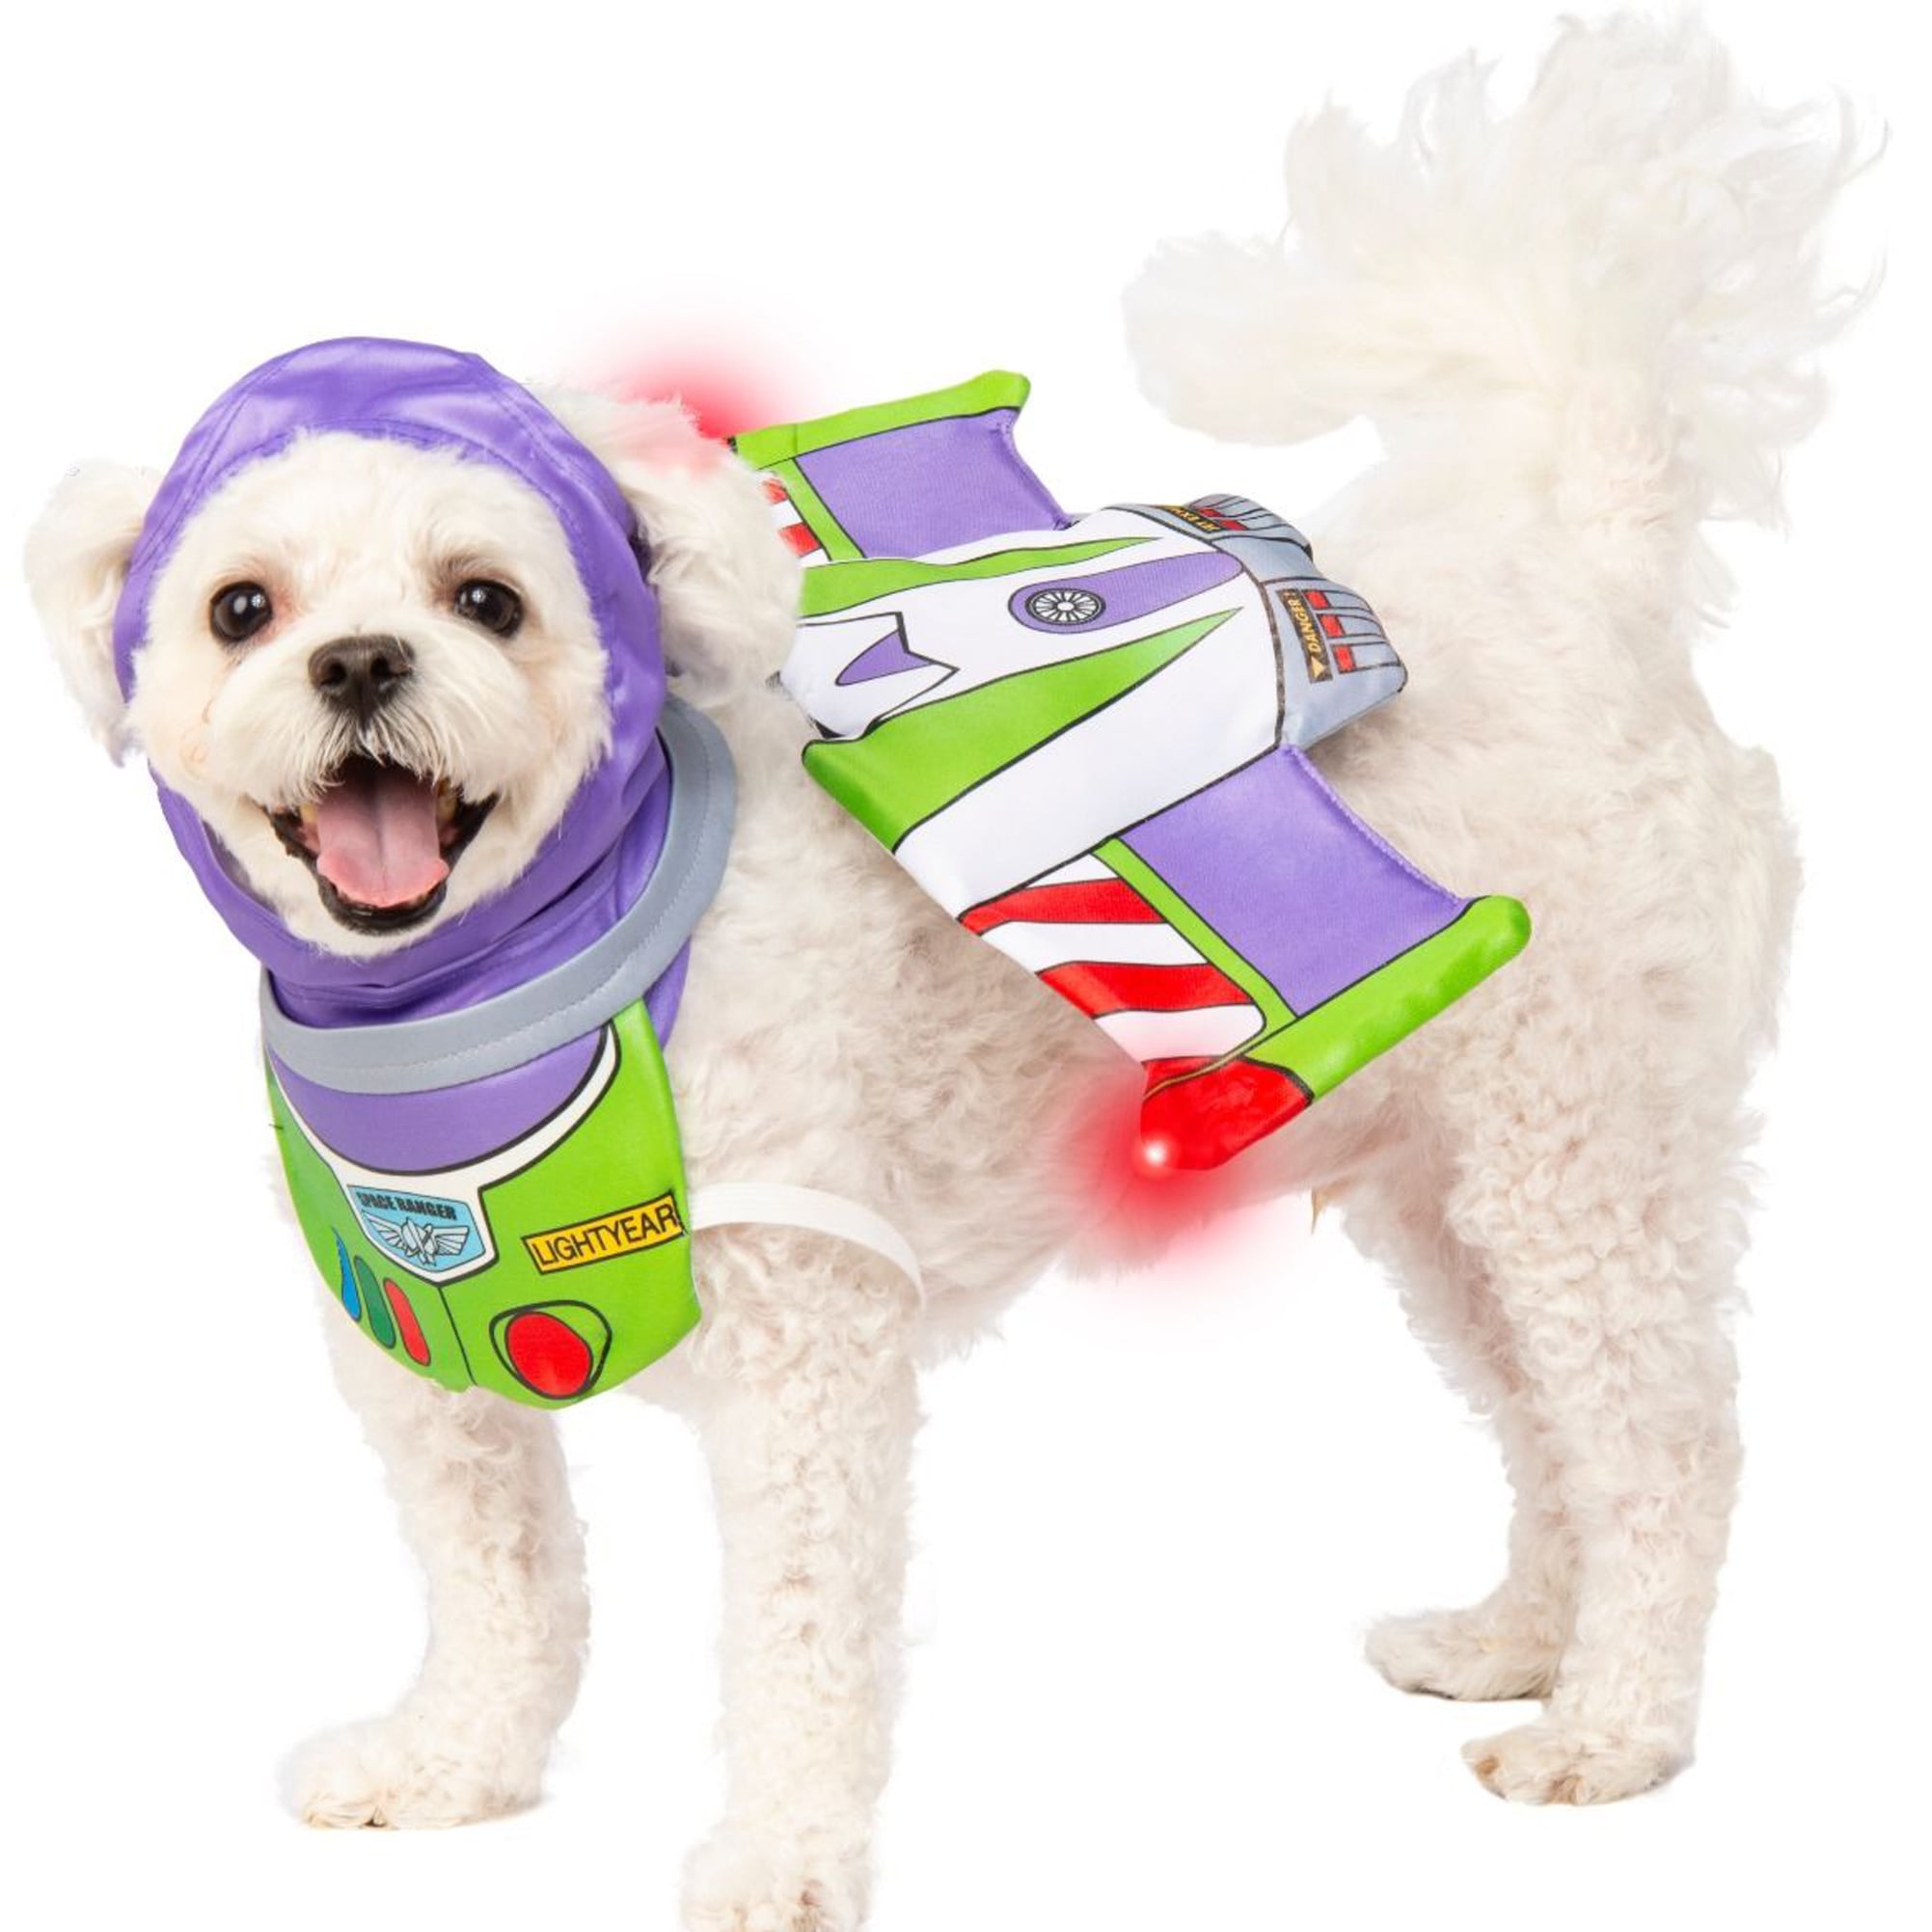 toy story 4 dog costumes